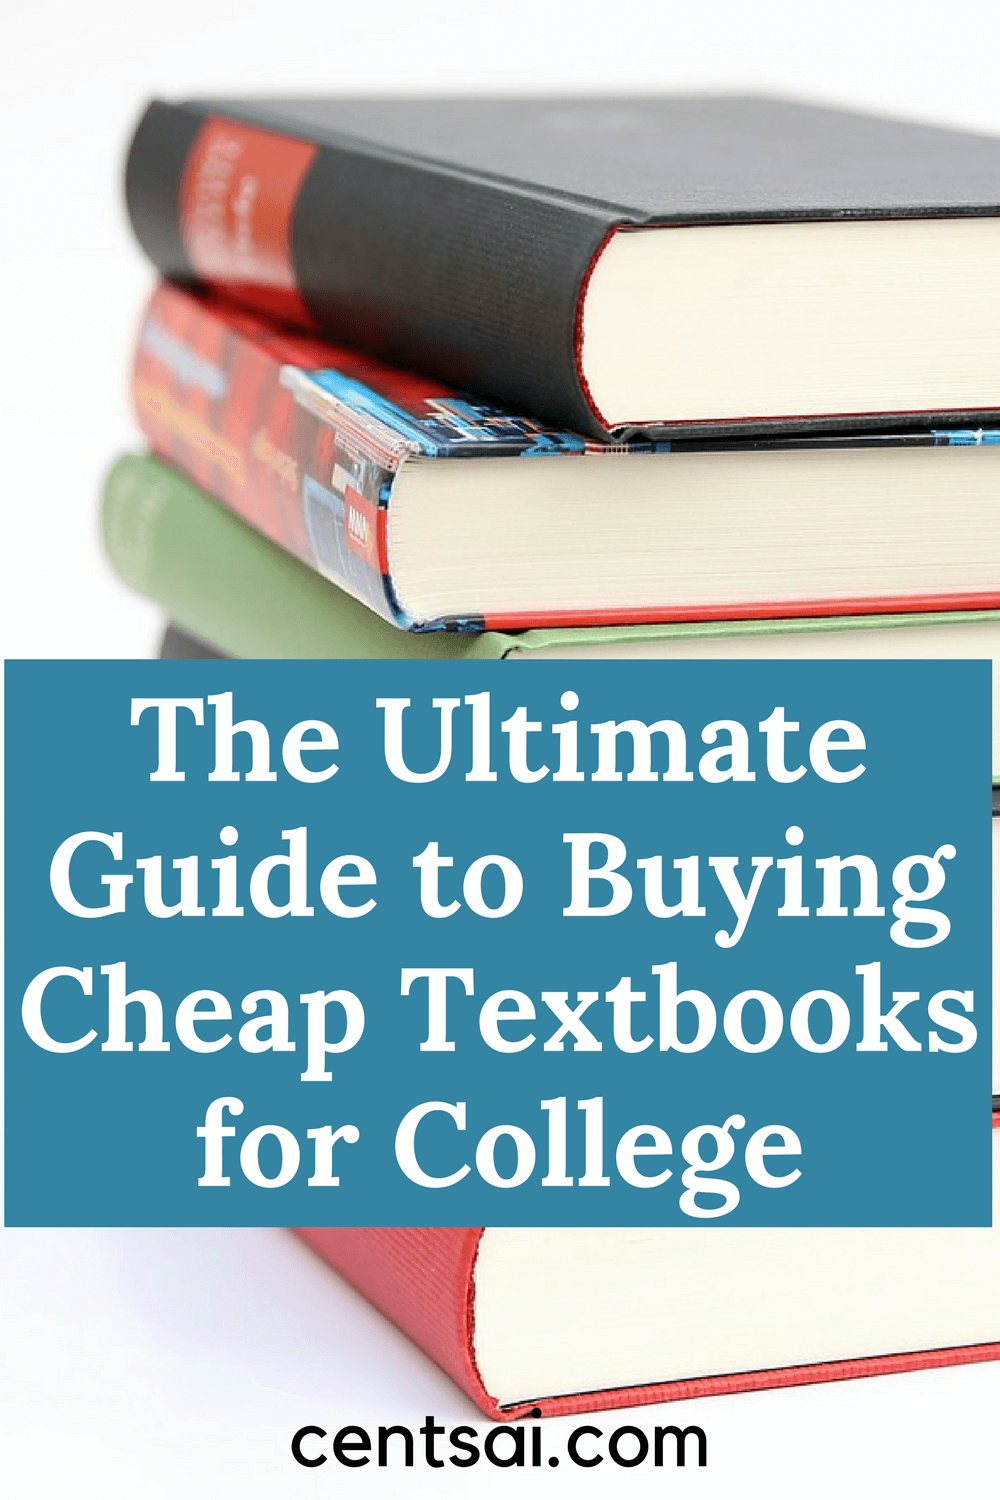 The Ultimate Guide to Buying Cheap Textbooks for College